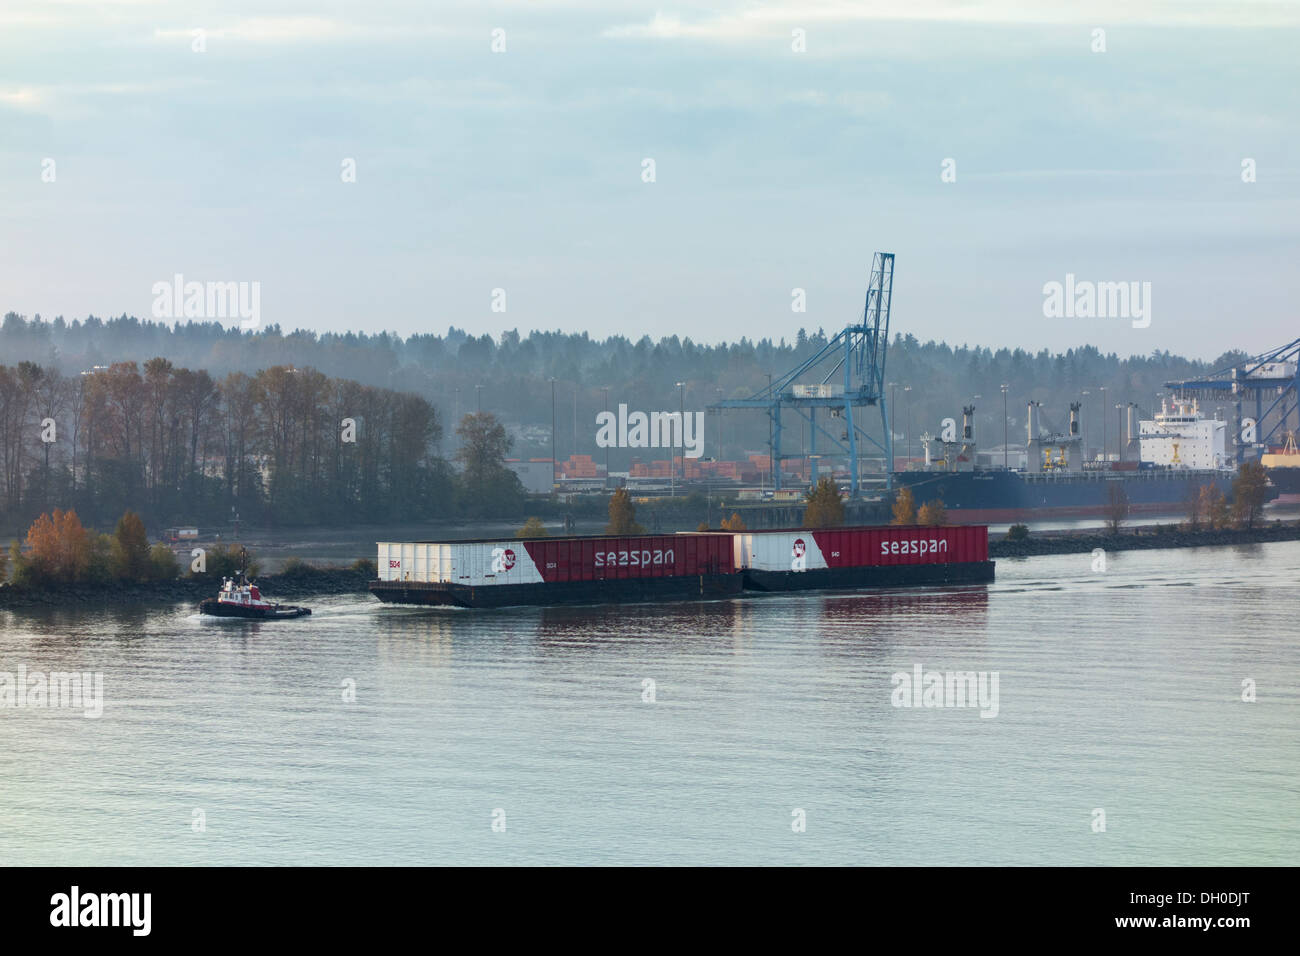 tugboat towing barge with oversize Seaspan containers, Fraser river, New Westminster, British Columbia, Canada Stock Photo